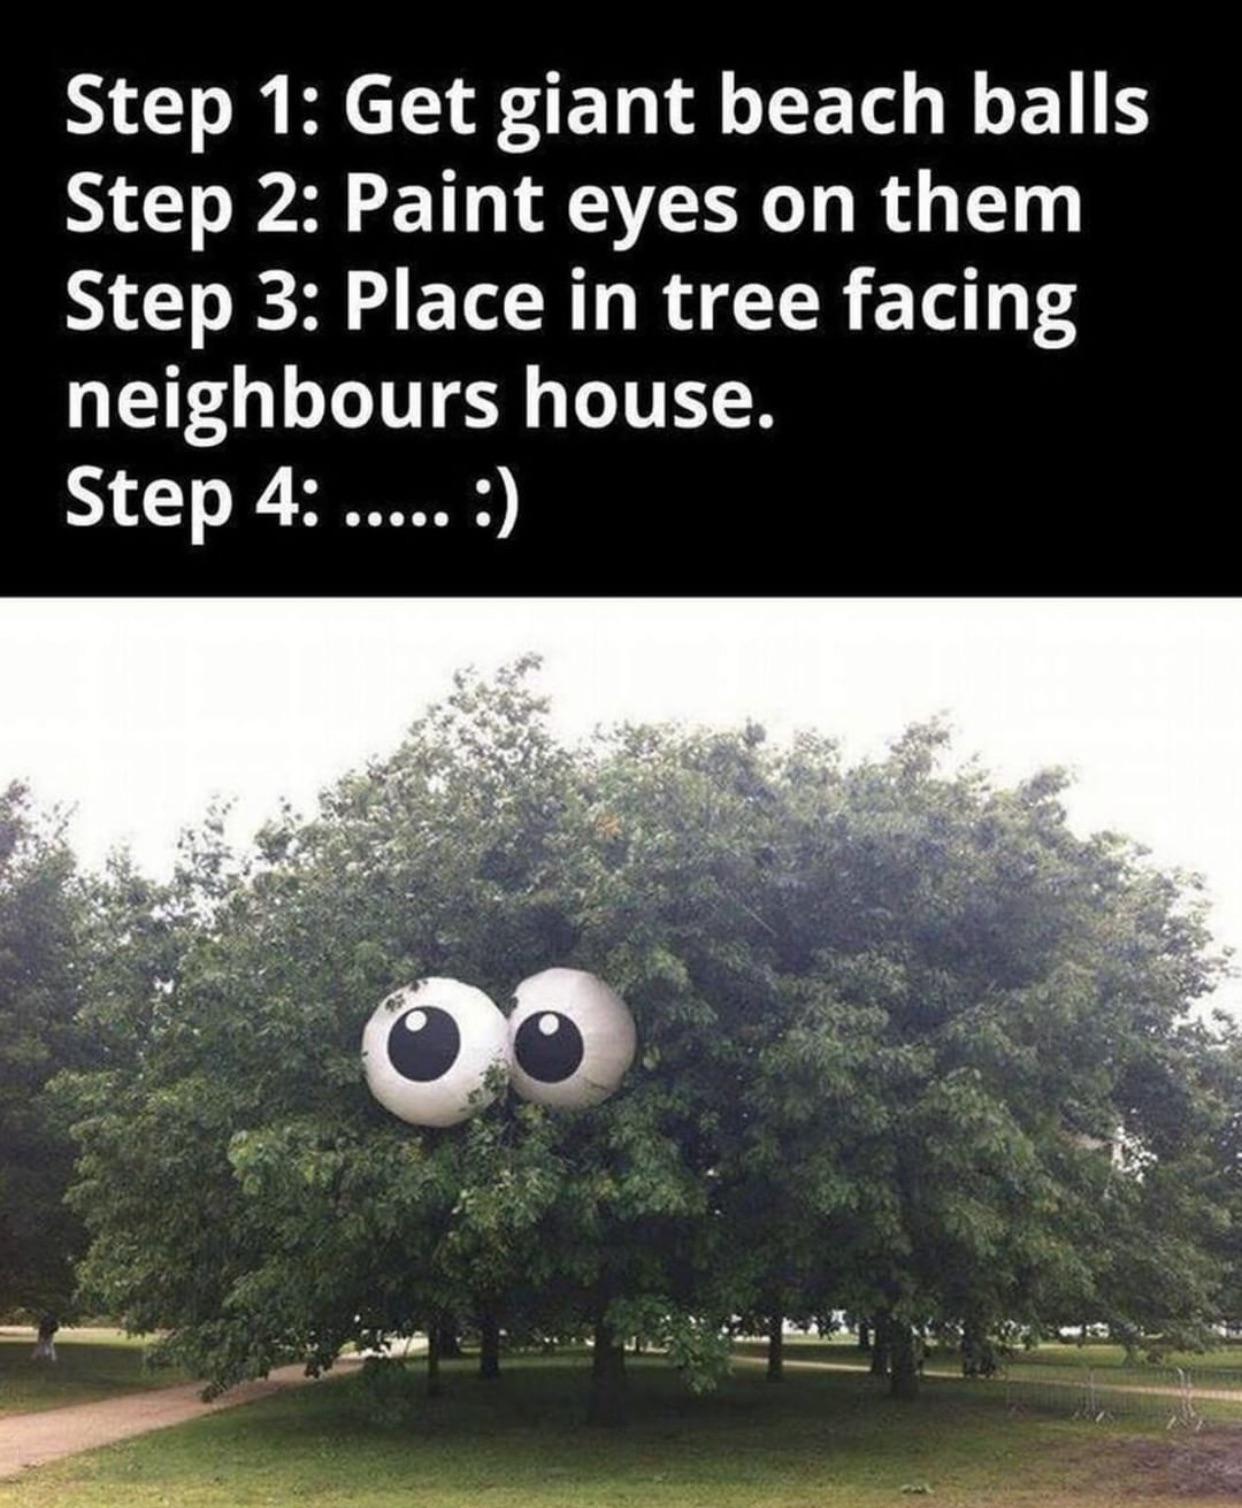 funny memes - halloween decorations for school - Step 1 Get giant beach balls Step 2 Paint eyes on them Step 3 Place in tree facing neighbours house. Step 4 ..... Do